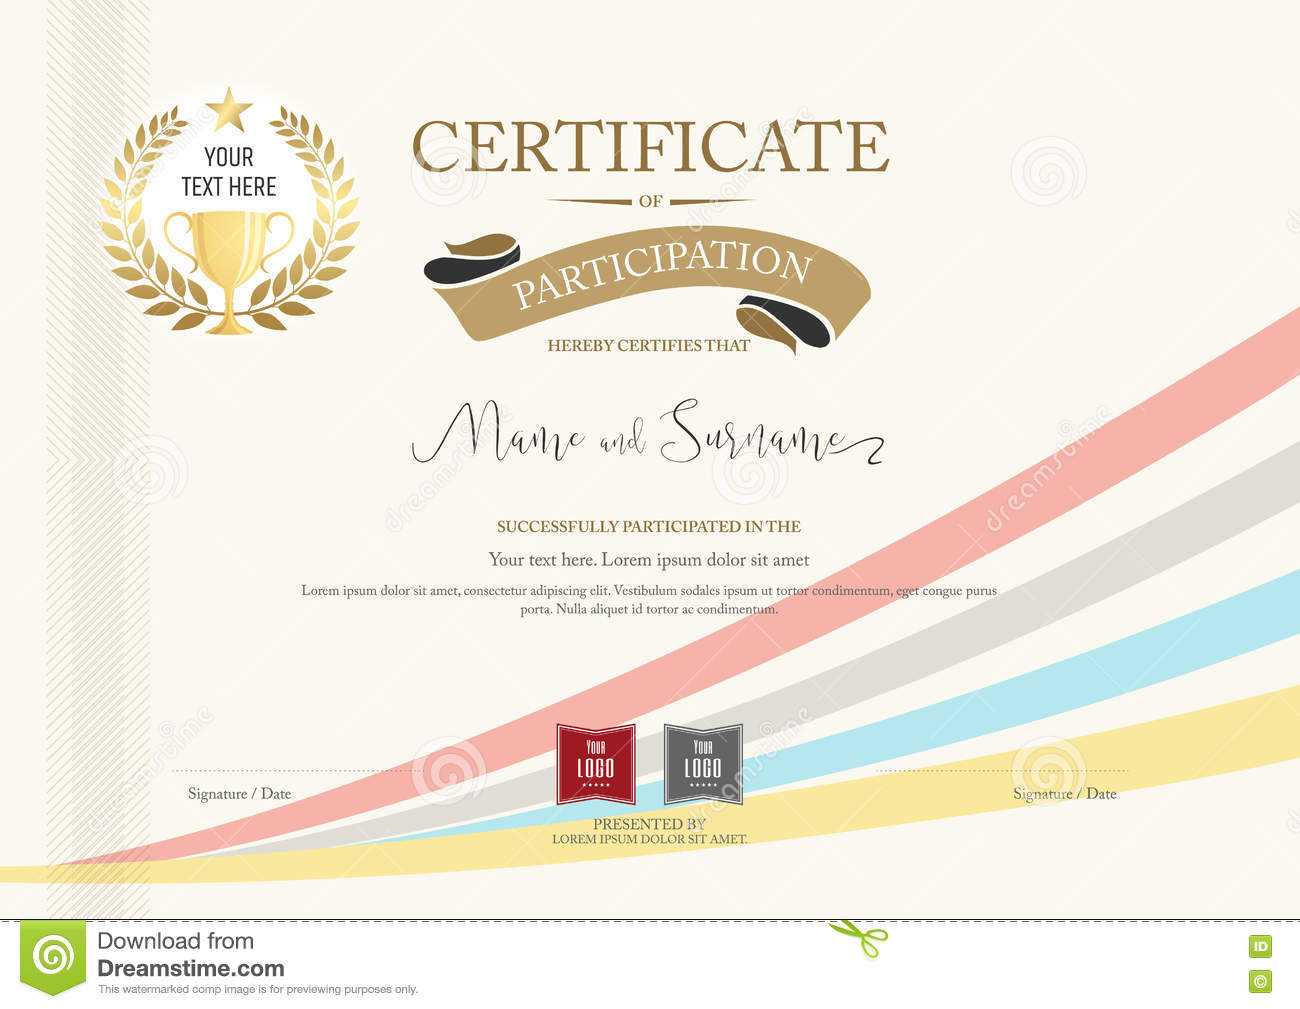 Certificate Of Participation Template With Golden Award With Templates For Certificates Of Participation